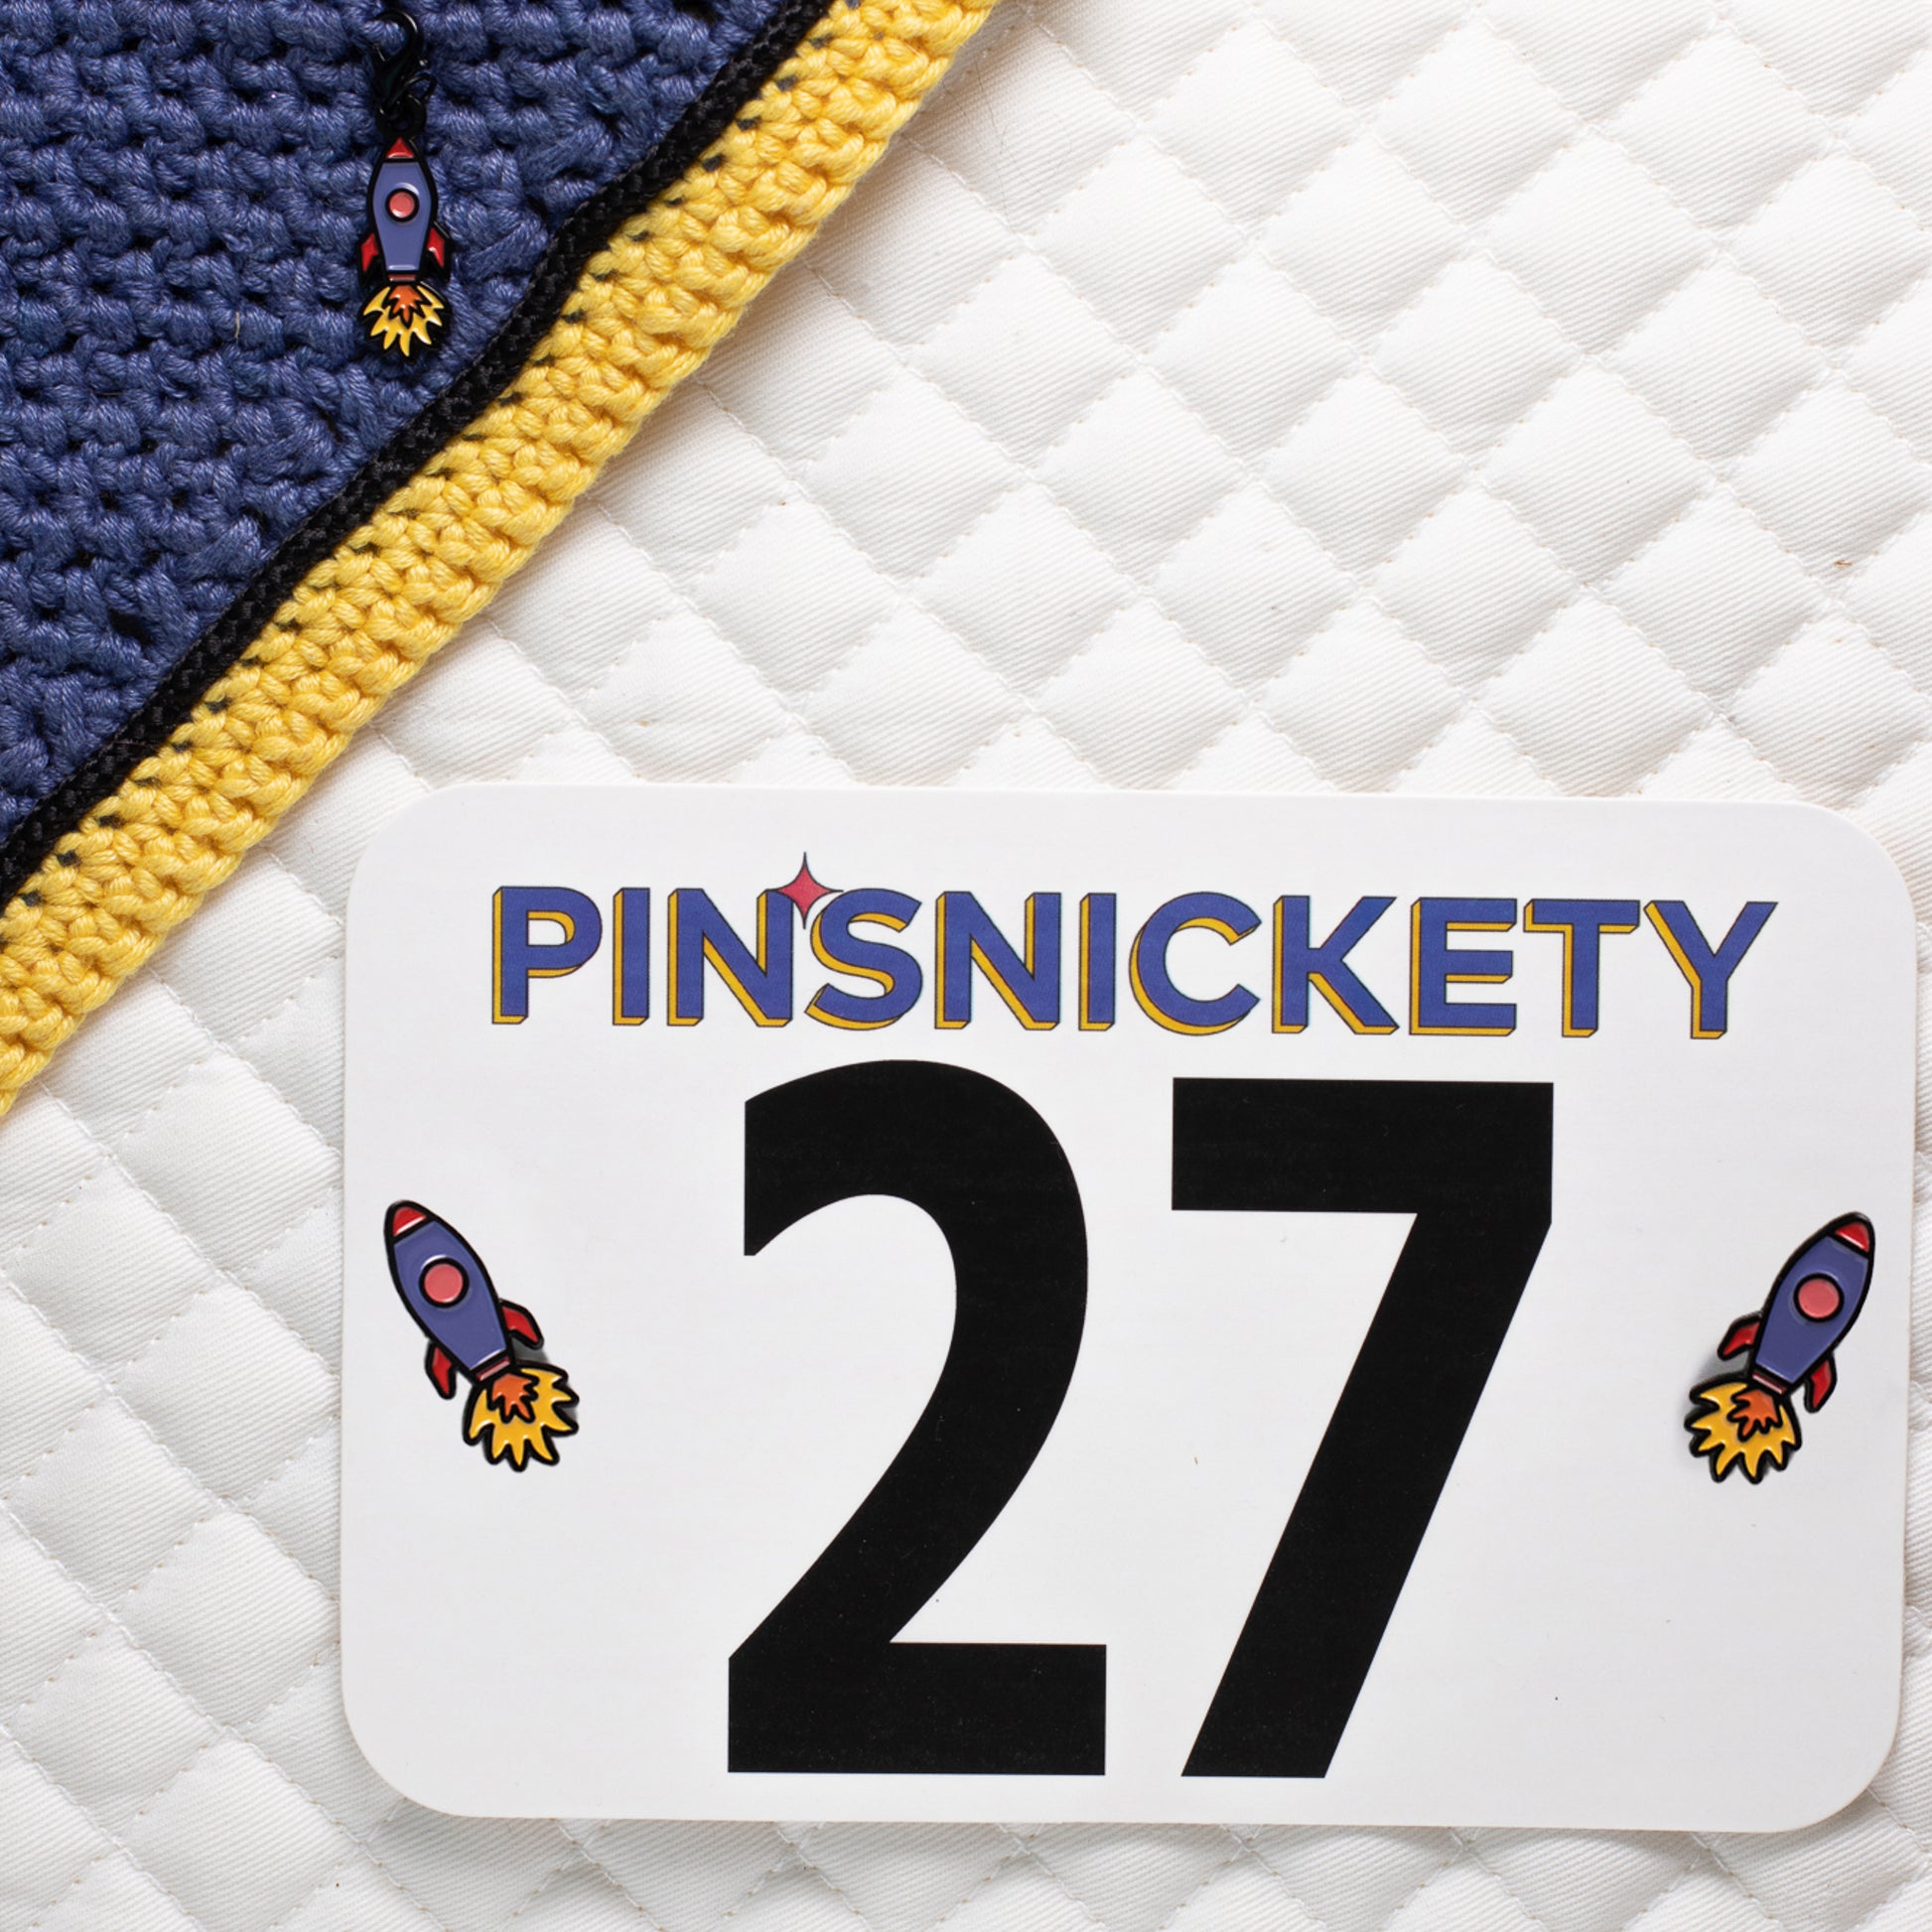 Pinsnickety rocket ship charm on a bonnet and rocket ship horse show number pins on a saddle pad